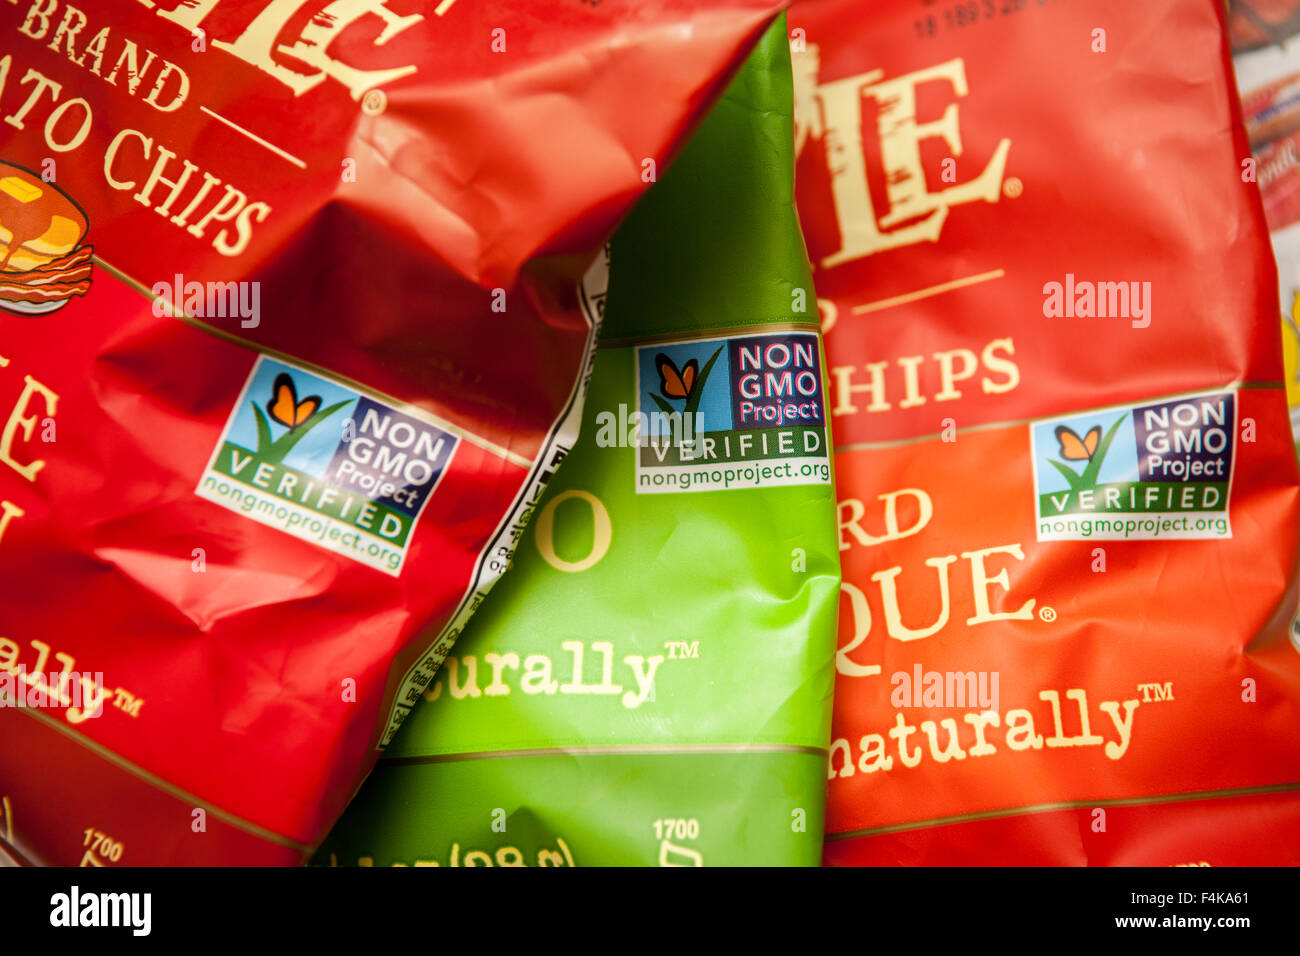 Kettle brand potato chips proudly display their 'Non-GMO Project Verified' labeling, seen in New York on Friday, October 9, 2015. Kettle is a brand of Diamond Foods. (© Richard B. Levine) Stock Photo